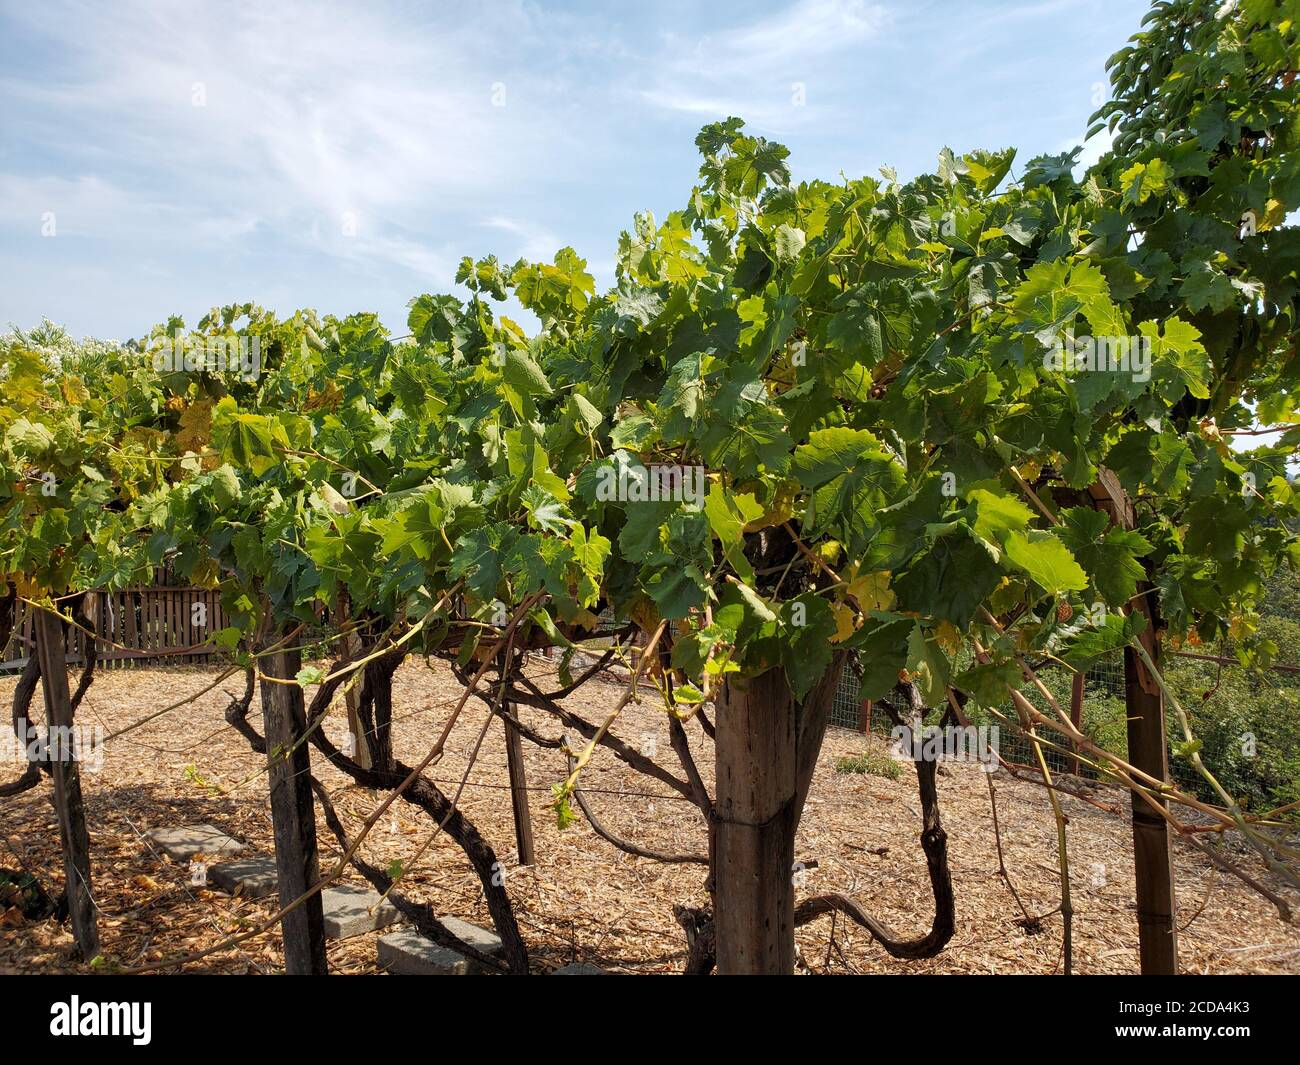 A small private grape vineyard for home winemaking is visible in Lafayette, California, August 18, 2020. () Stock Photo